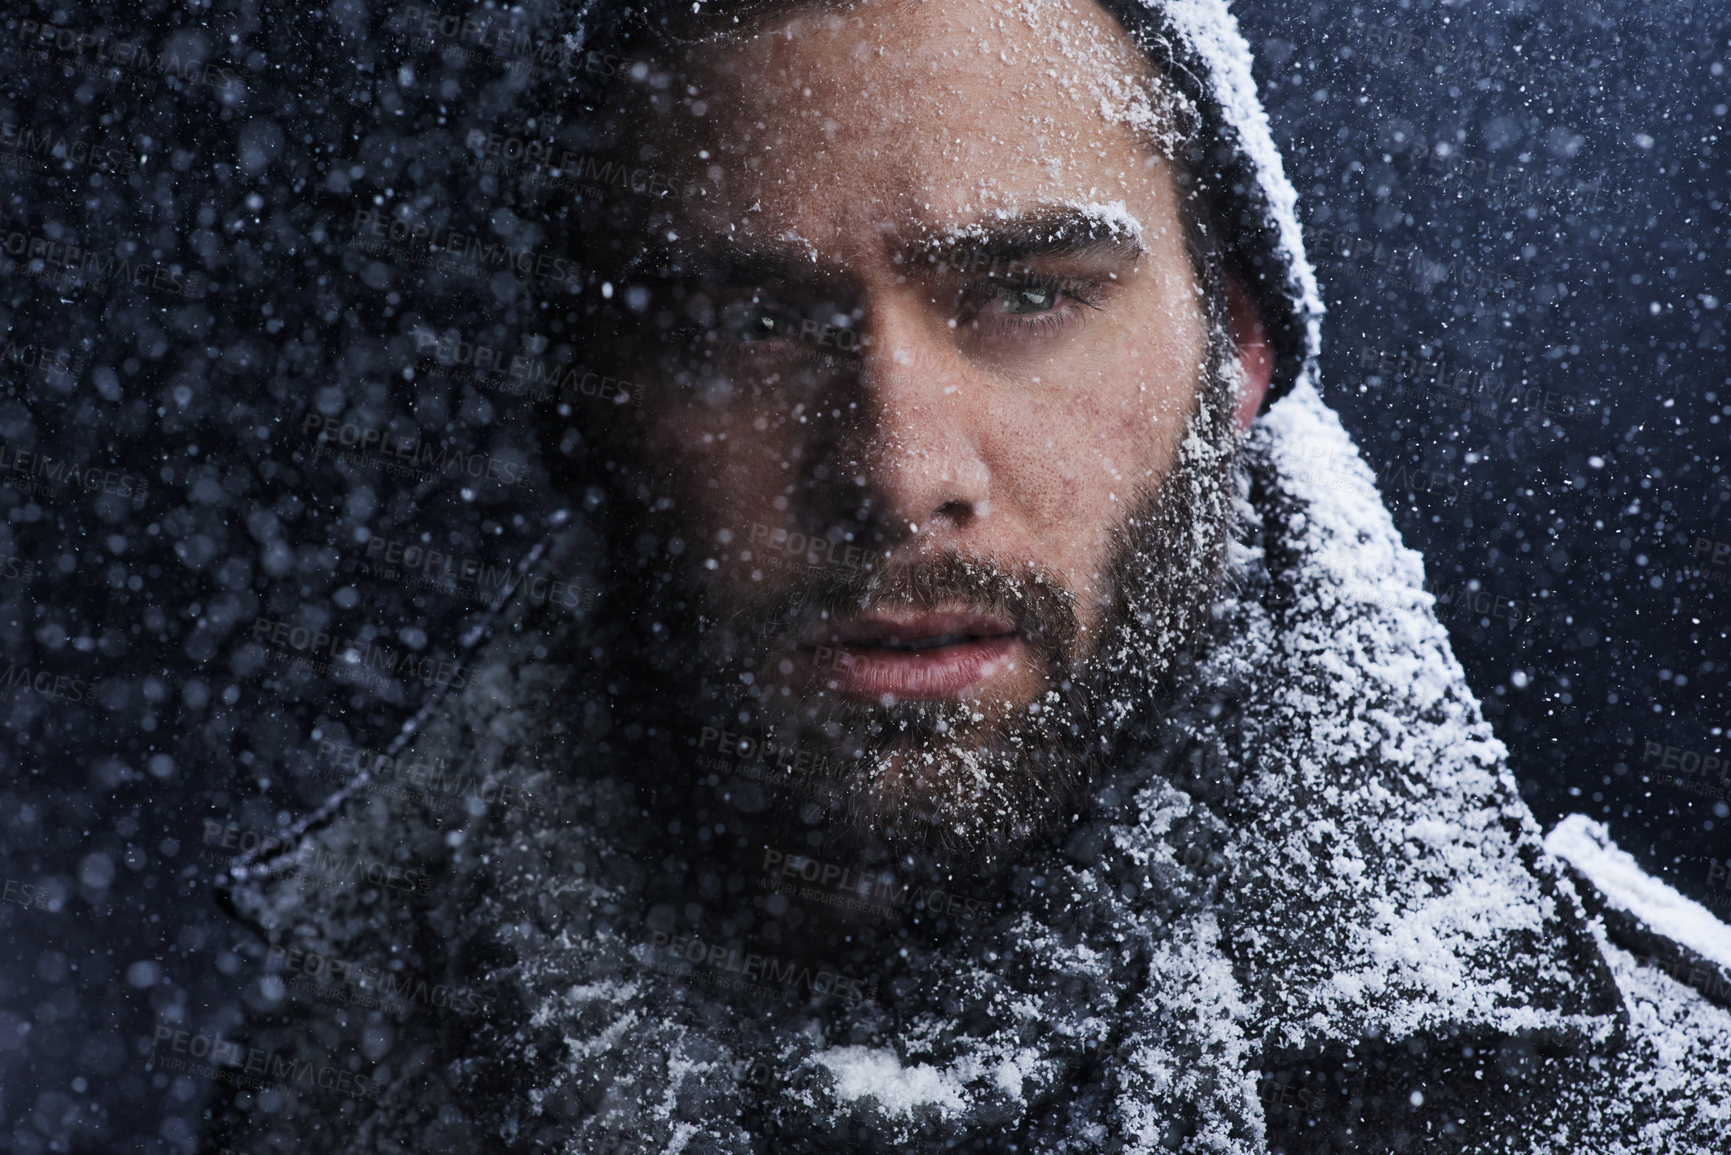 Buy stock photo Snow, night and man with serious portrait outdoor in winter with storm, ice and travel with cold climate. Cool, frost and male person in Iceland with adventure and freezing from weather in nature